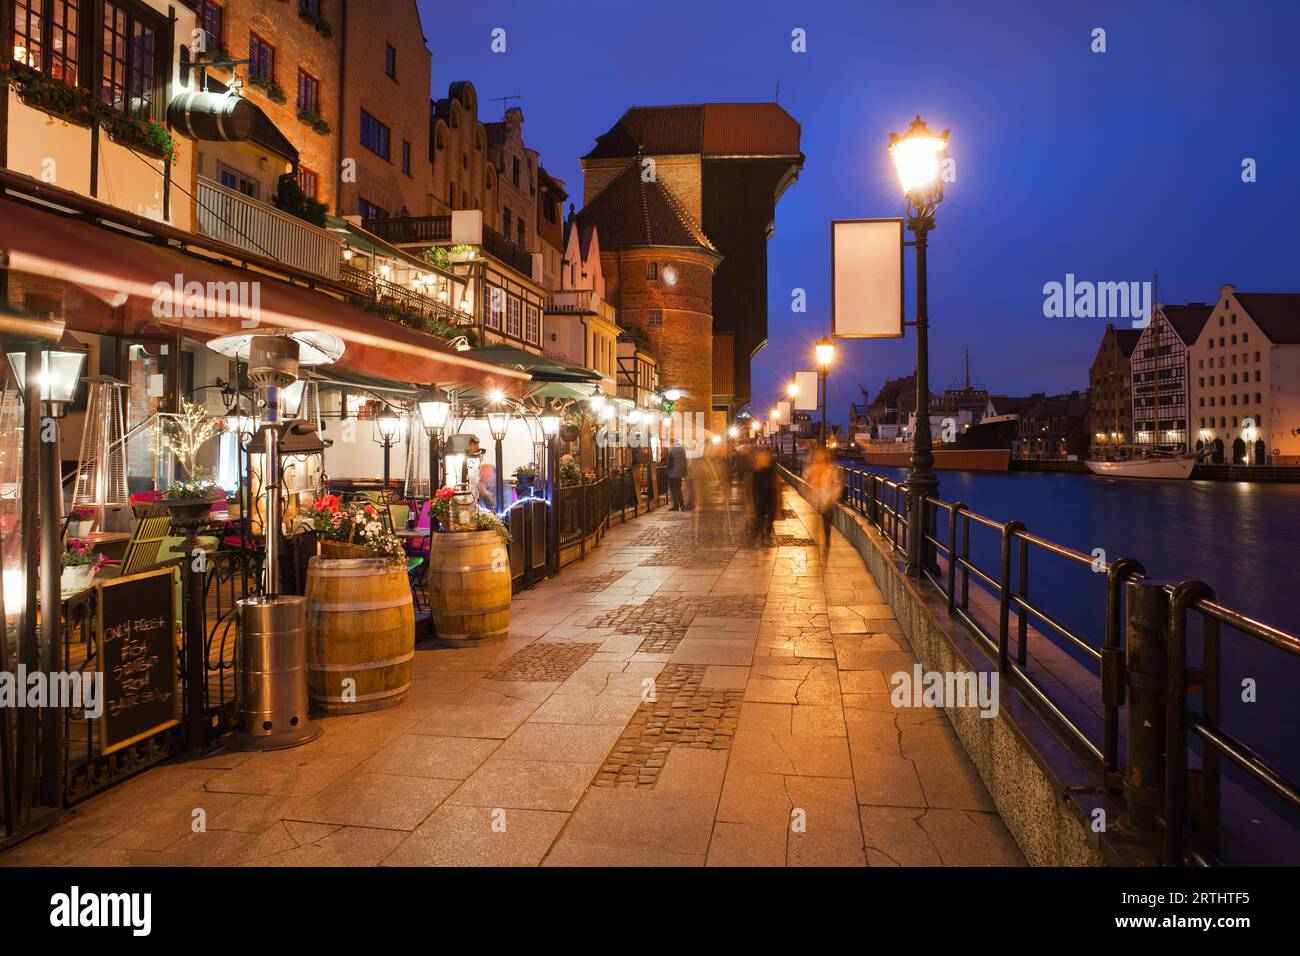 City break in Old Town of Gdansk by night in Poland, Europe, riverside promenade (Dlugie Pobrzeze street) with cafes, restaurants, view towards The Stock Photo